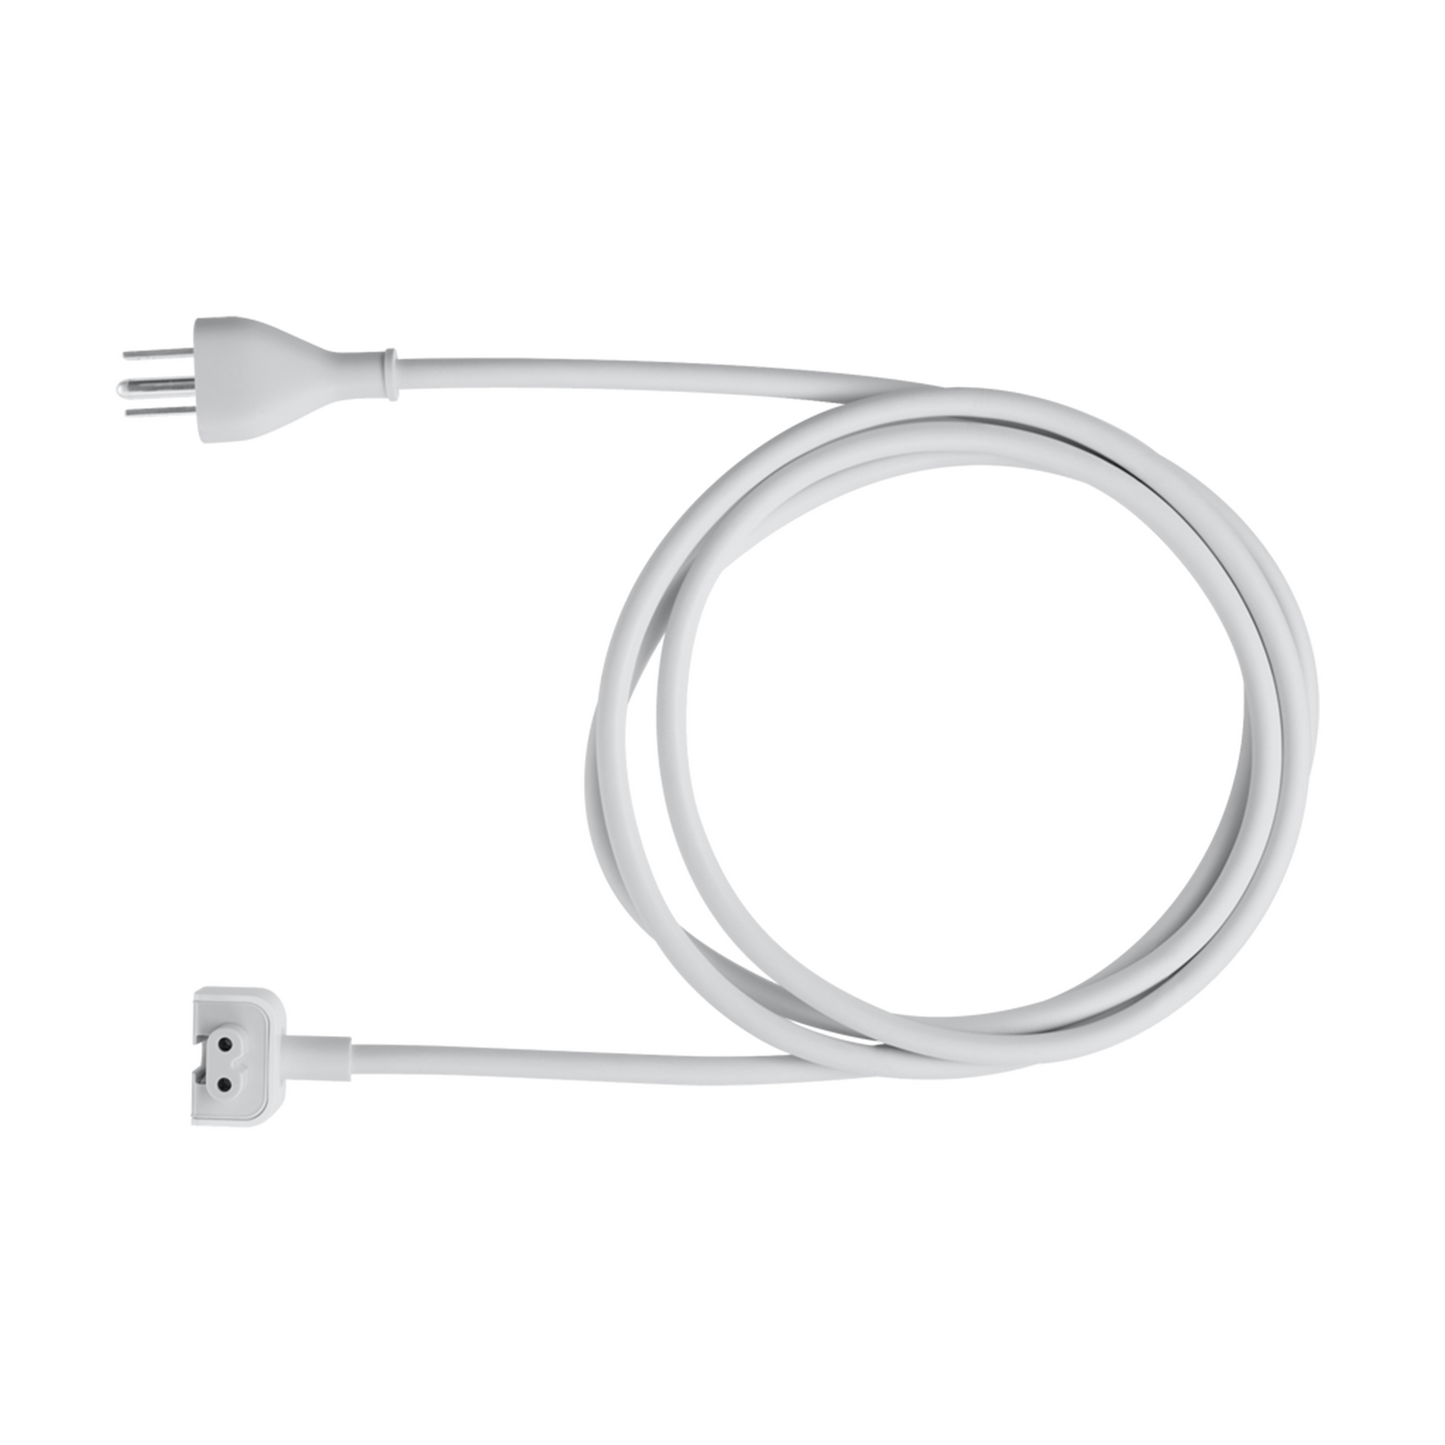 Apple Power Adapter extension cable